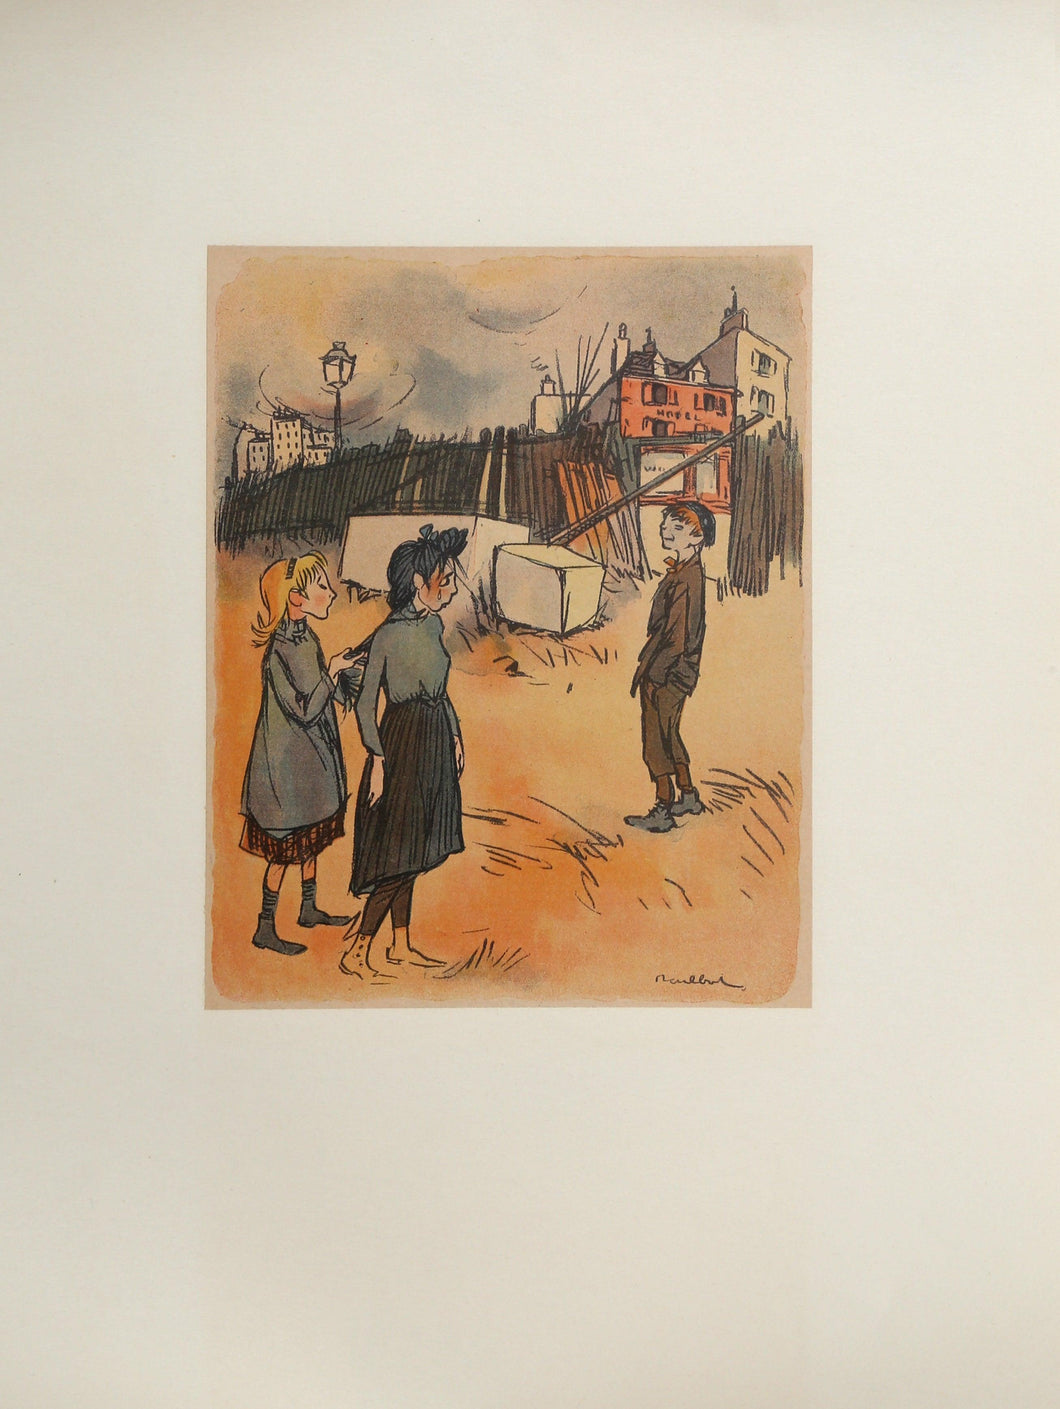 Outside for Le Rire Lithograph | Francisque Poulbot,{{product.type}}